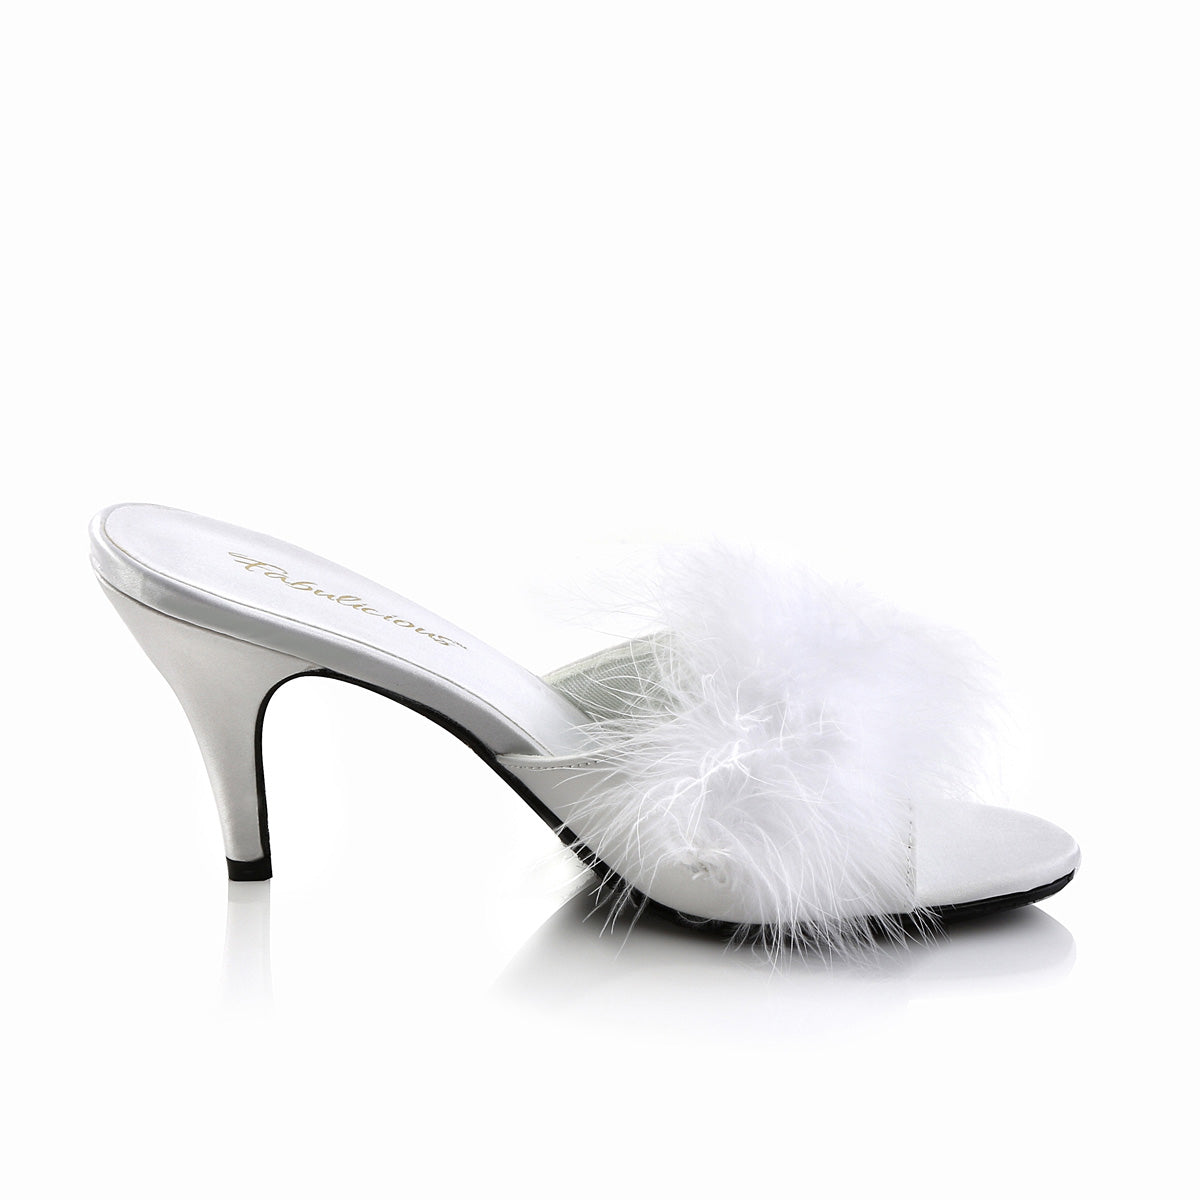 Fabulicious Womens Sandals AMOUR-03 Wht Pu-Fur